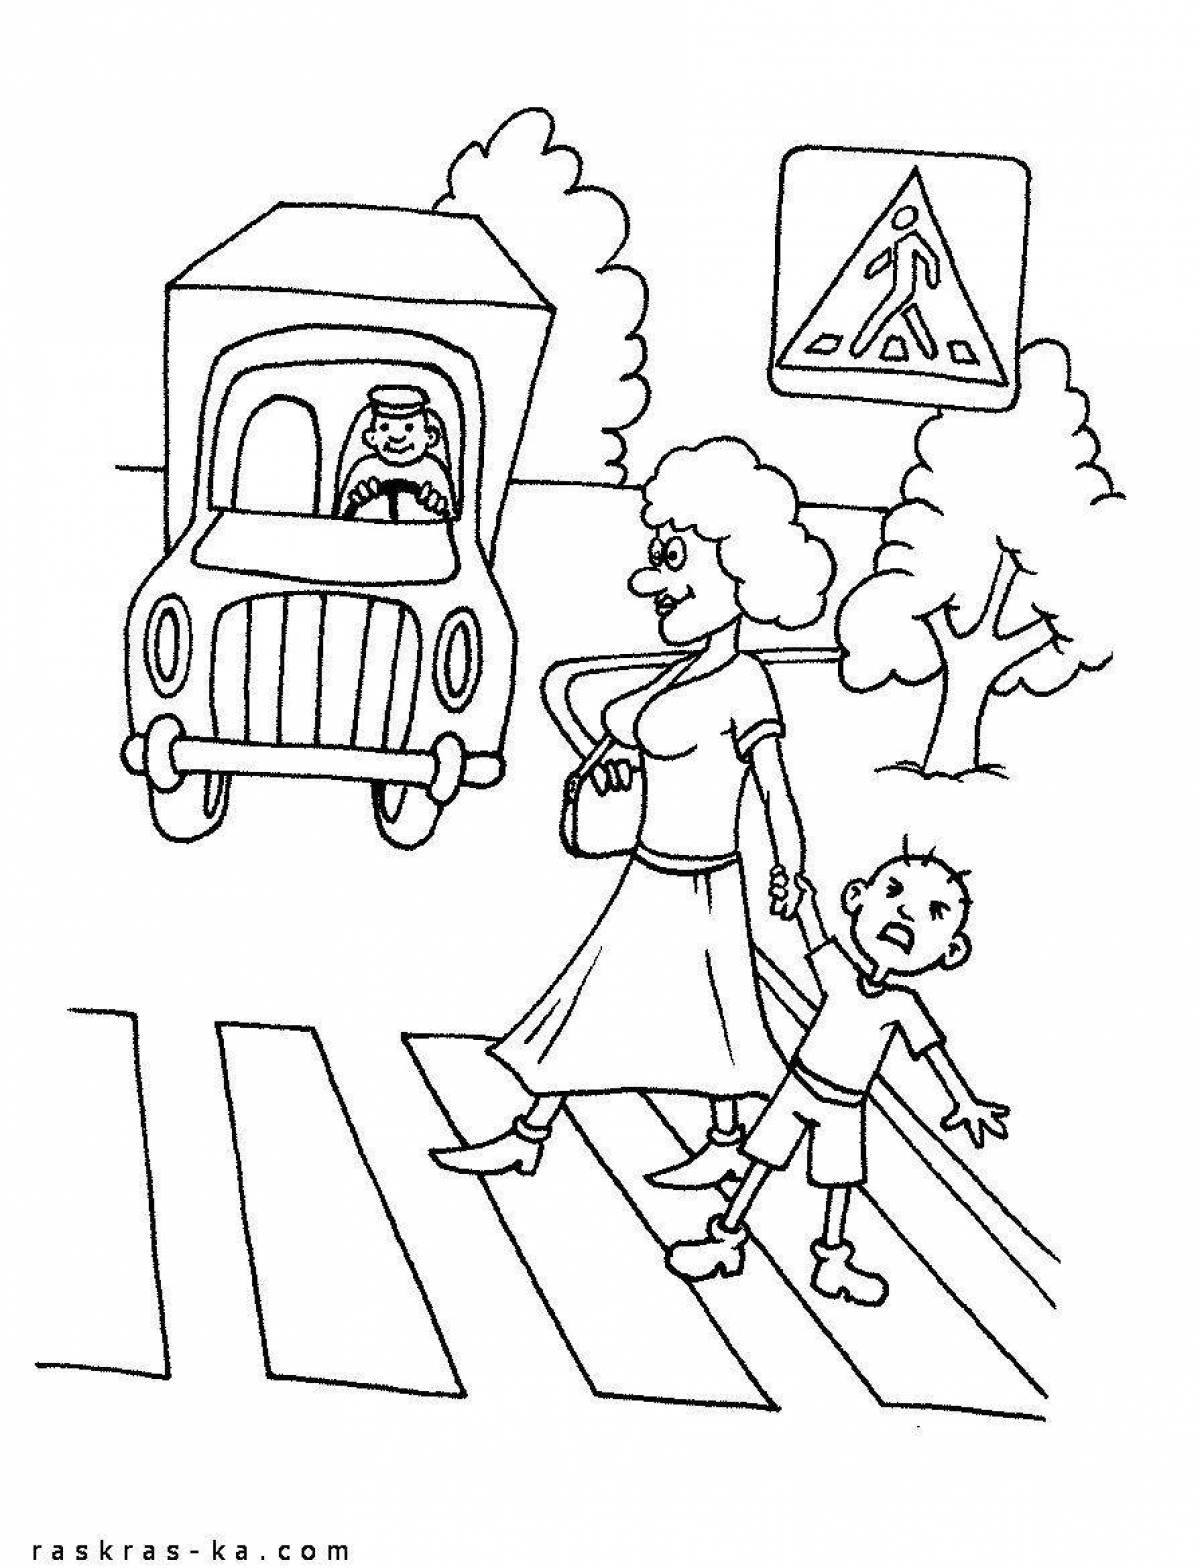 Child safety coloring page